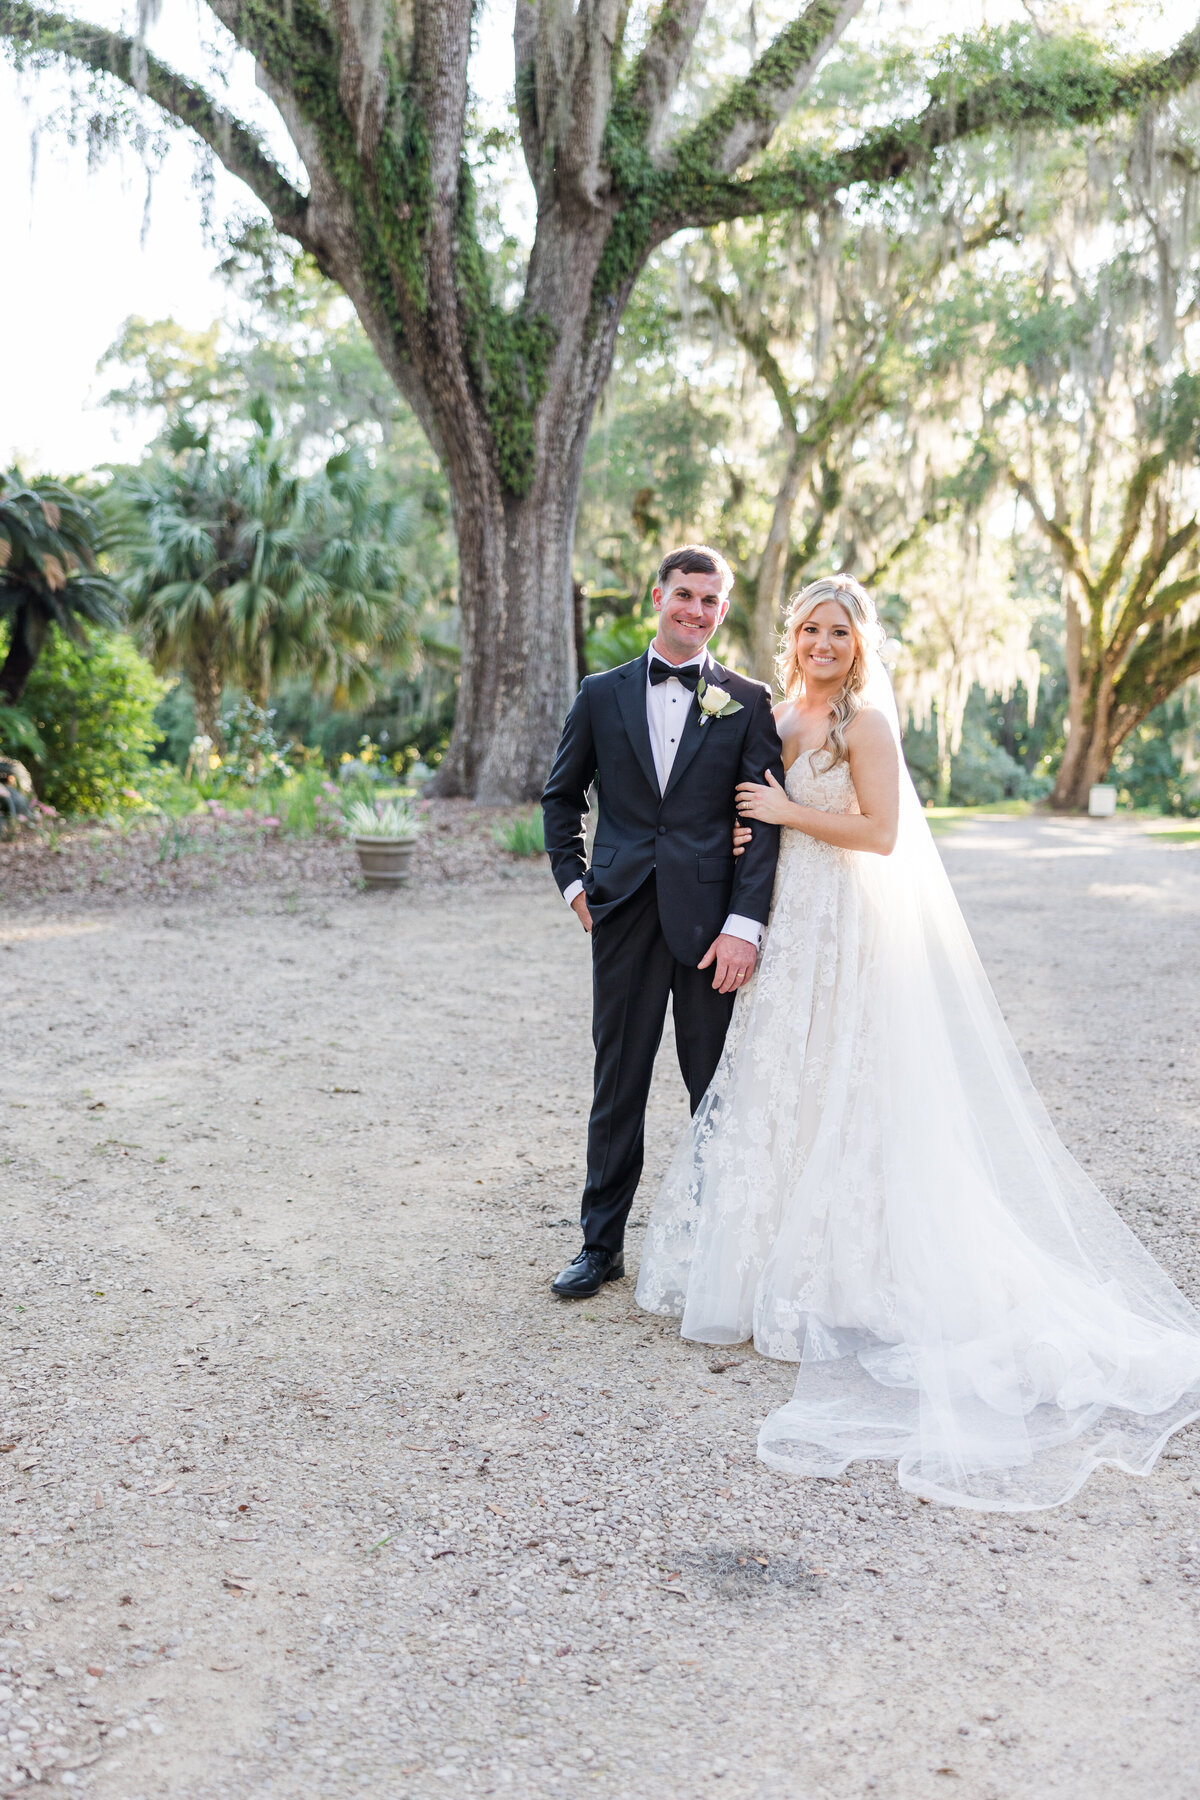 Mary Warren & Justin Wedding - Taylor'd Southern Events - Florida Photographer-2847